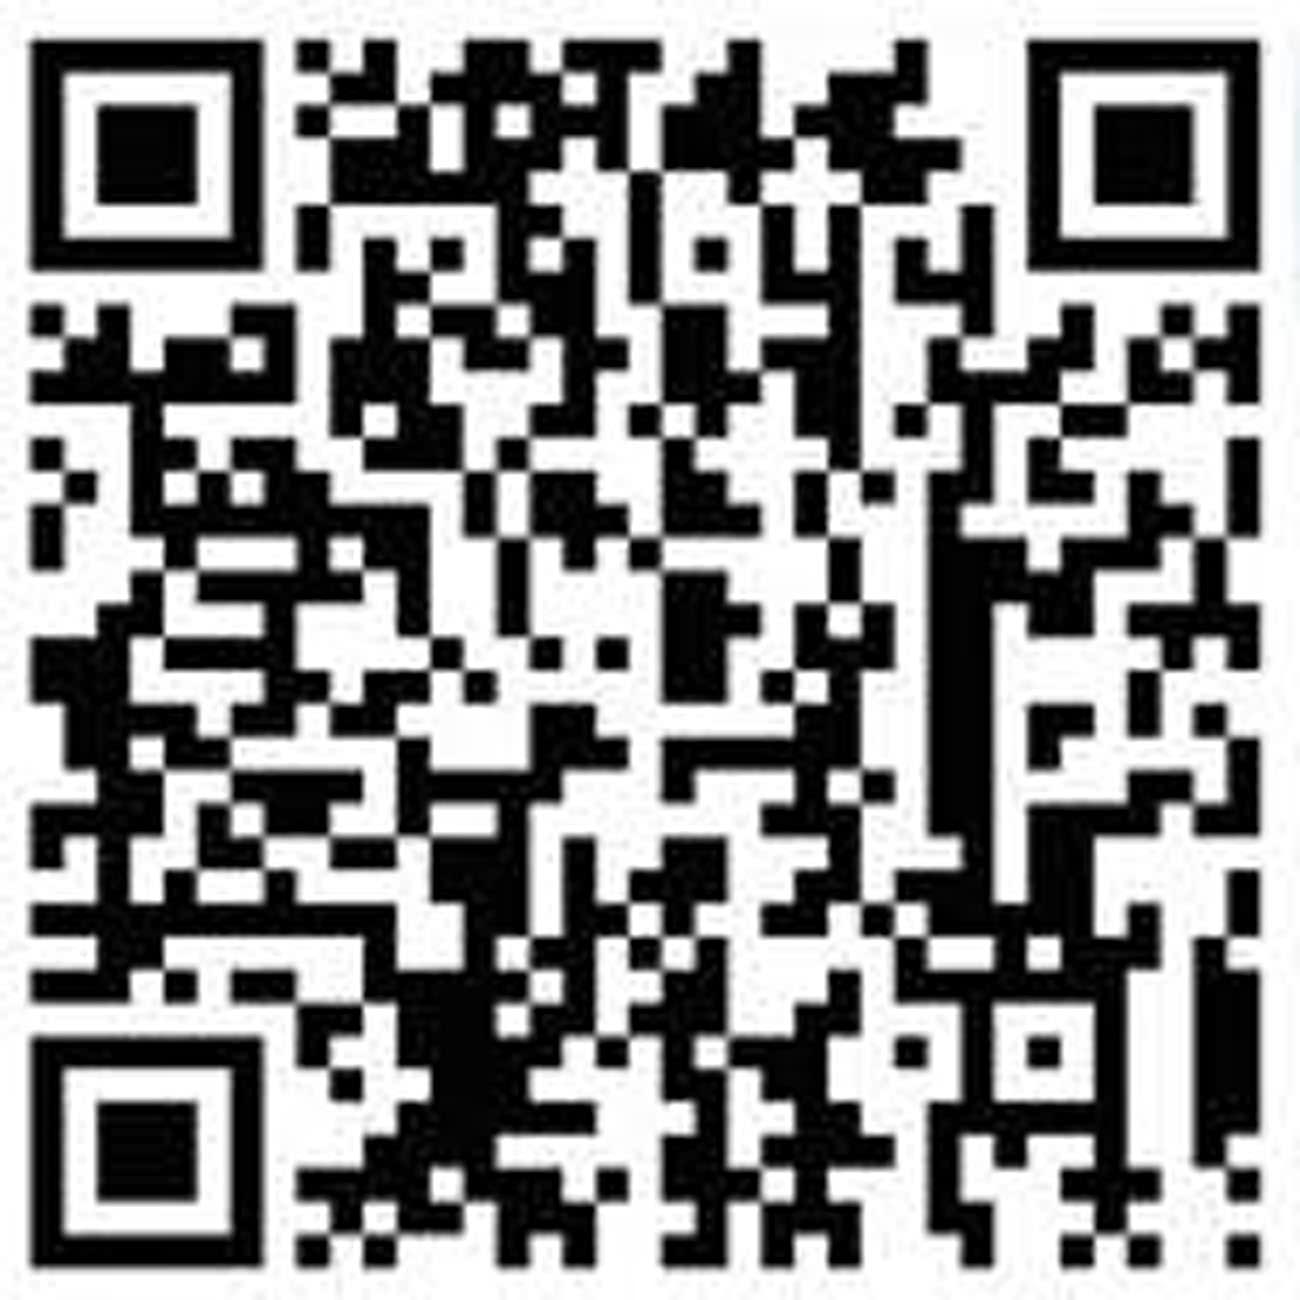 QRCode Android